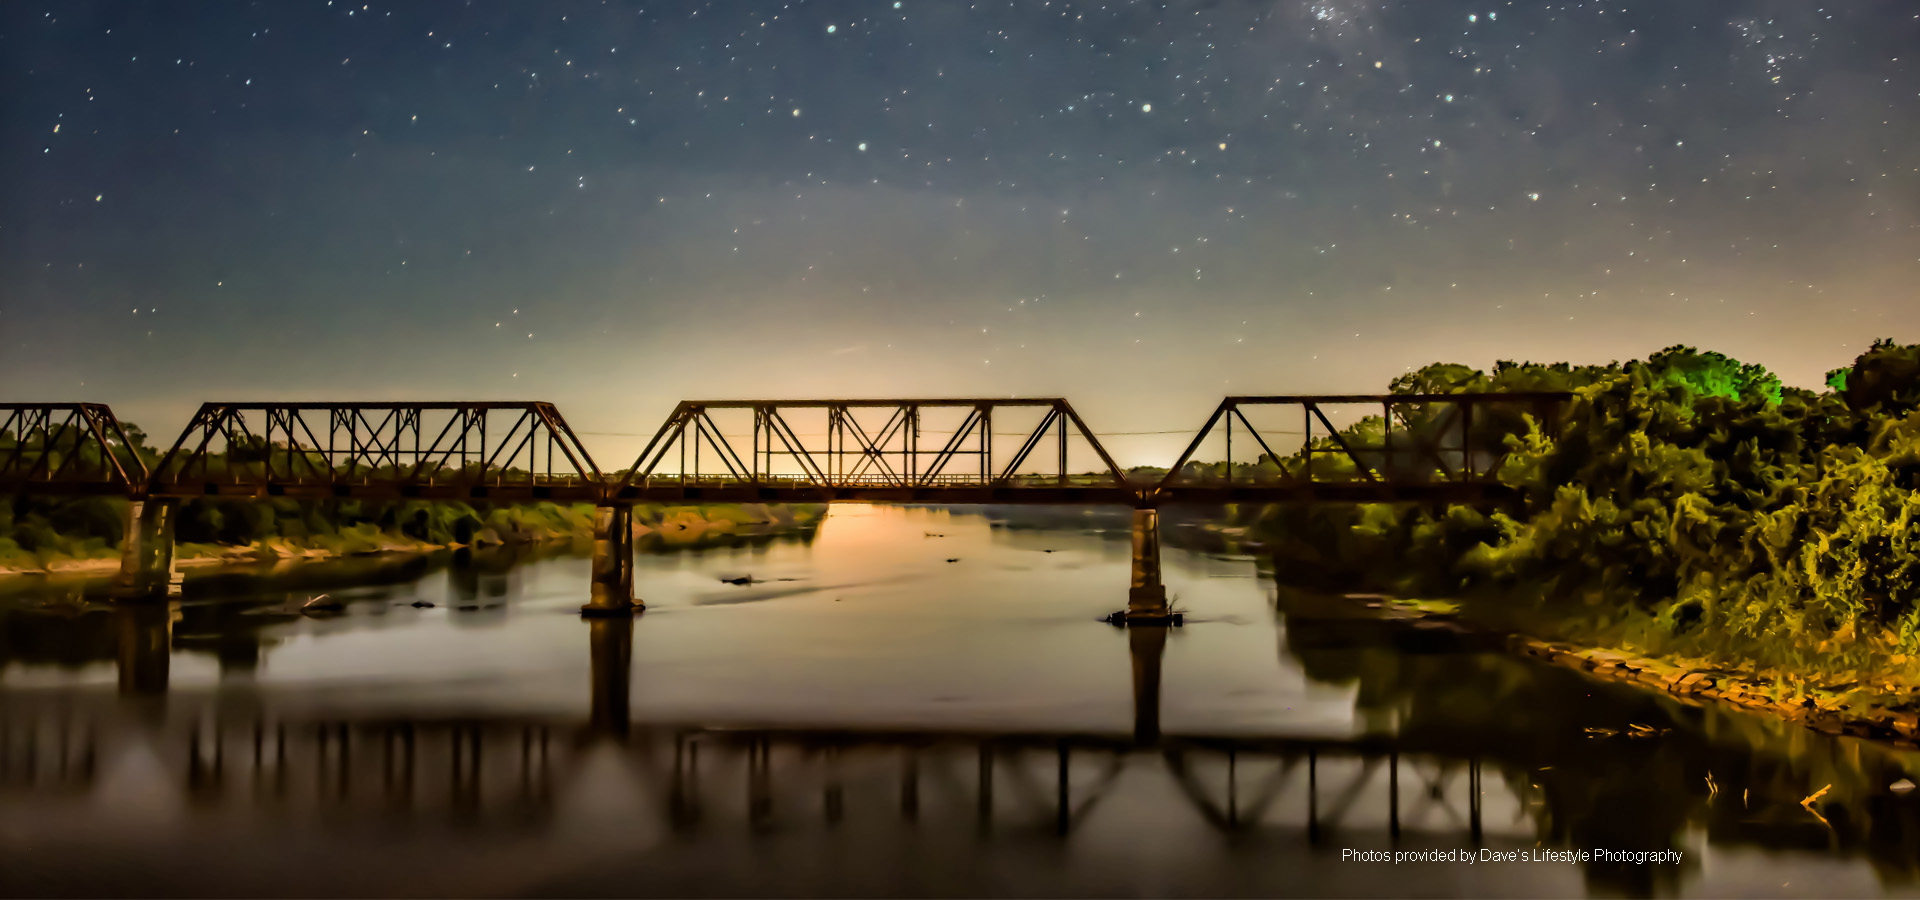 Carpenters Bluff Bridge Image by Dave's Lifestyle Photography